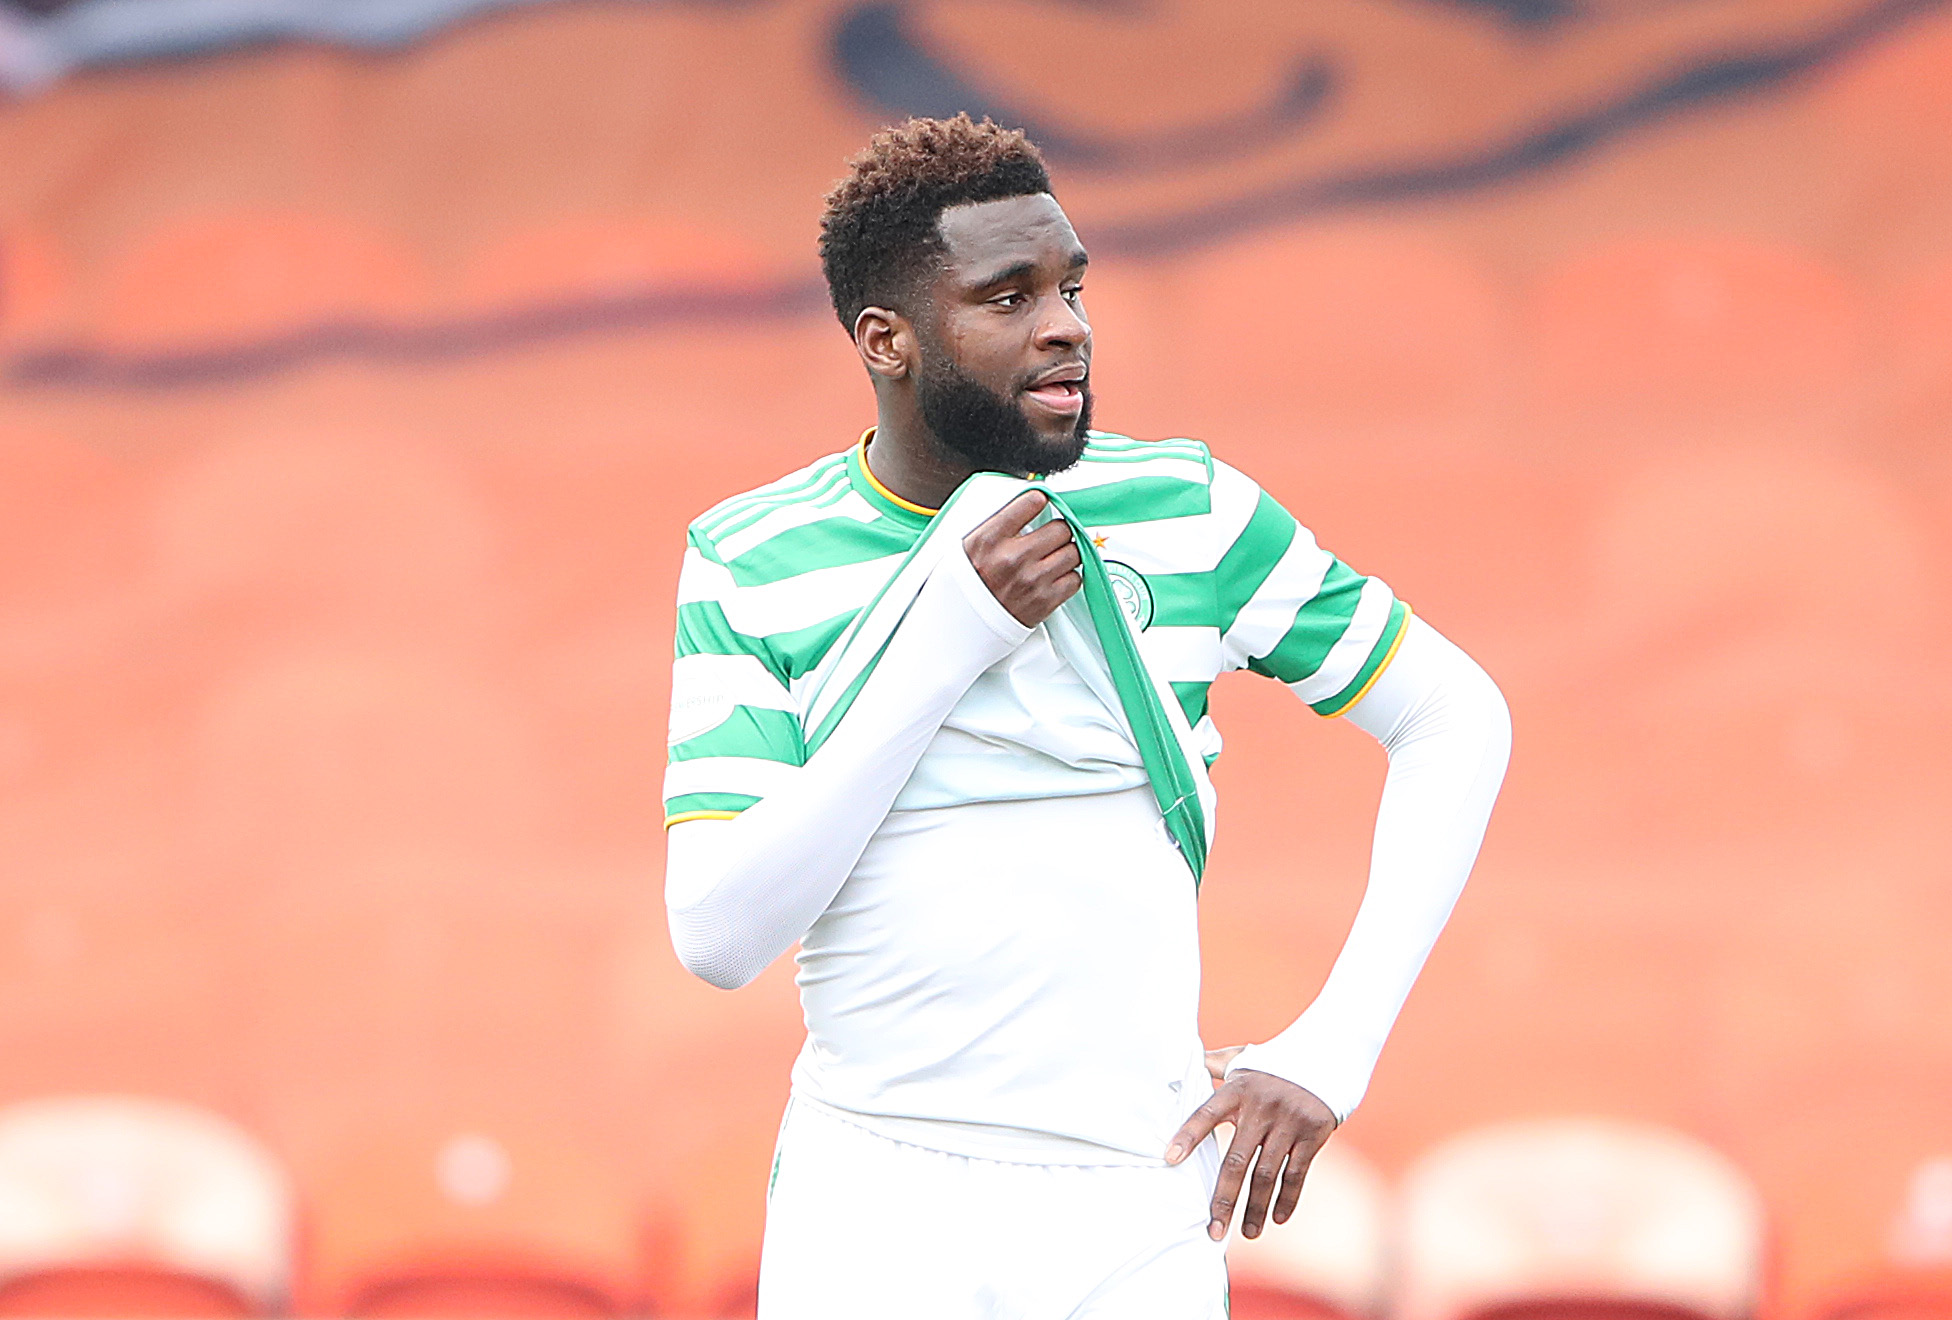 Despite "struggles", Odsonne Edouard could still top his 18-19 tally for Celtic